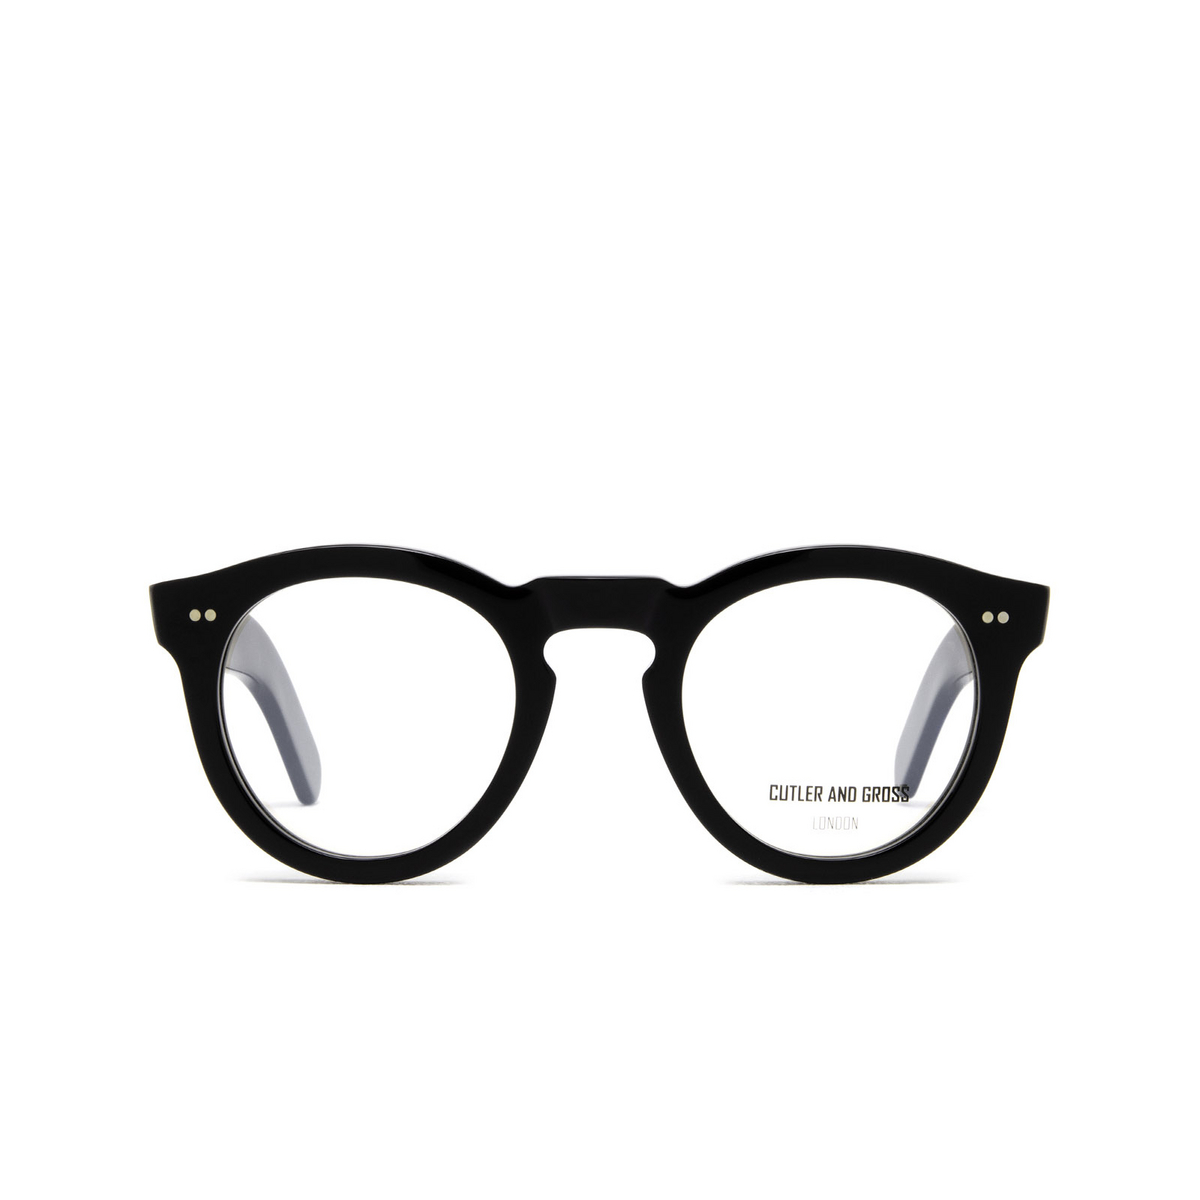 Cutler and Gross® Round Eyeglasses: 0734V3 color Black B - front view.